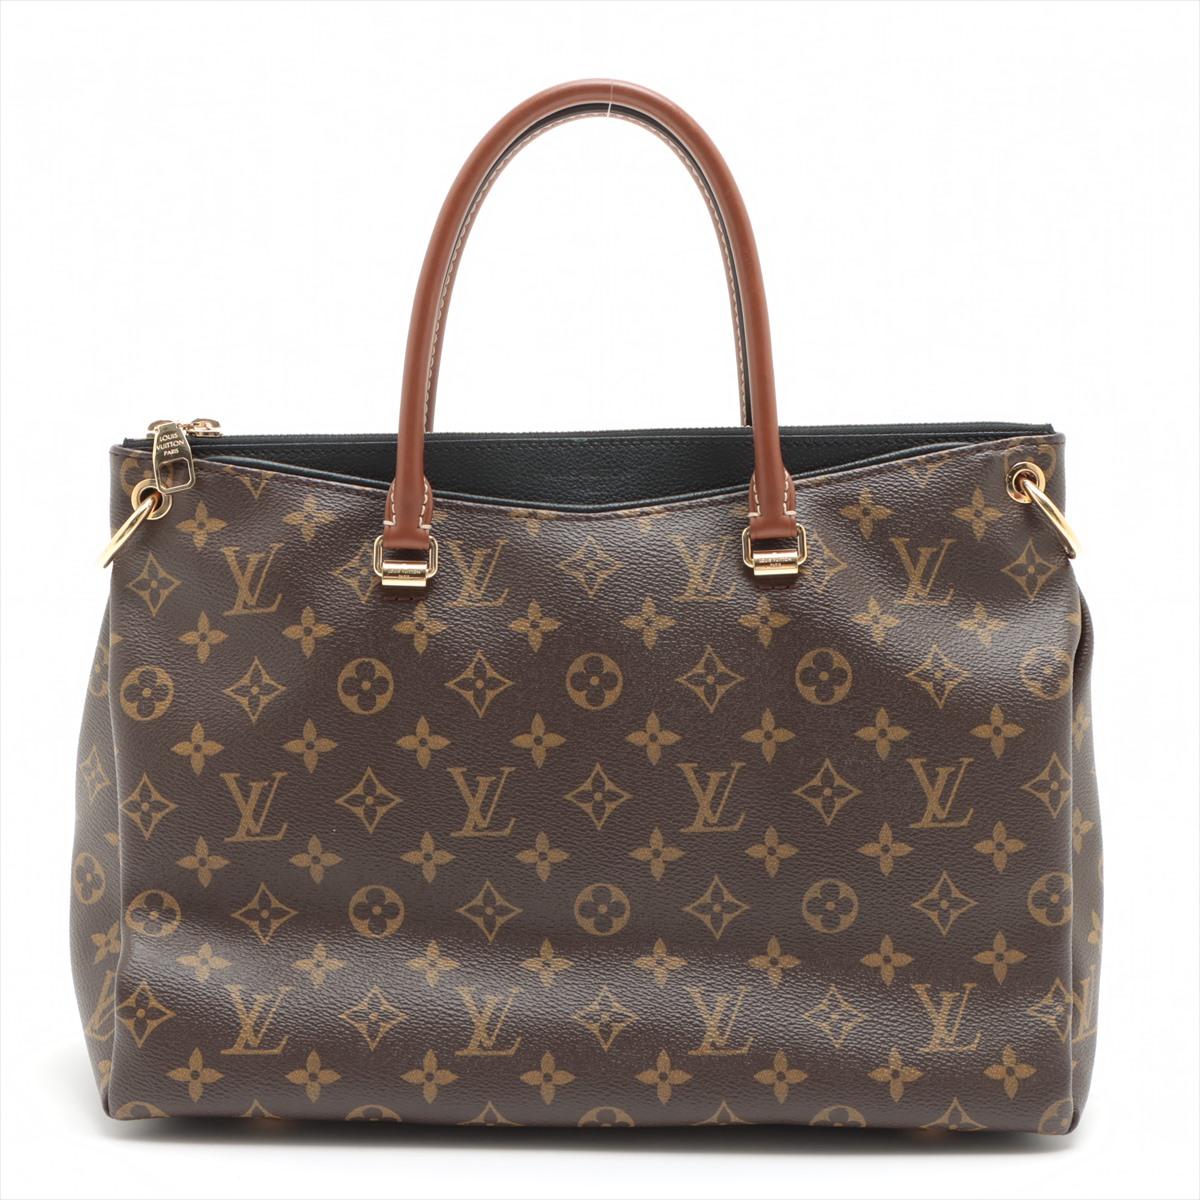 The Louis Vuitton Monogram Pallas MM is a luxurious and versatile handbag that showcases the brand's iconic Monogram canvas pattern in a sophisticated and contemporary design.  The bag features the renowned Monogram canvas, which is a symbol of